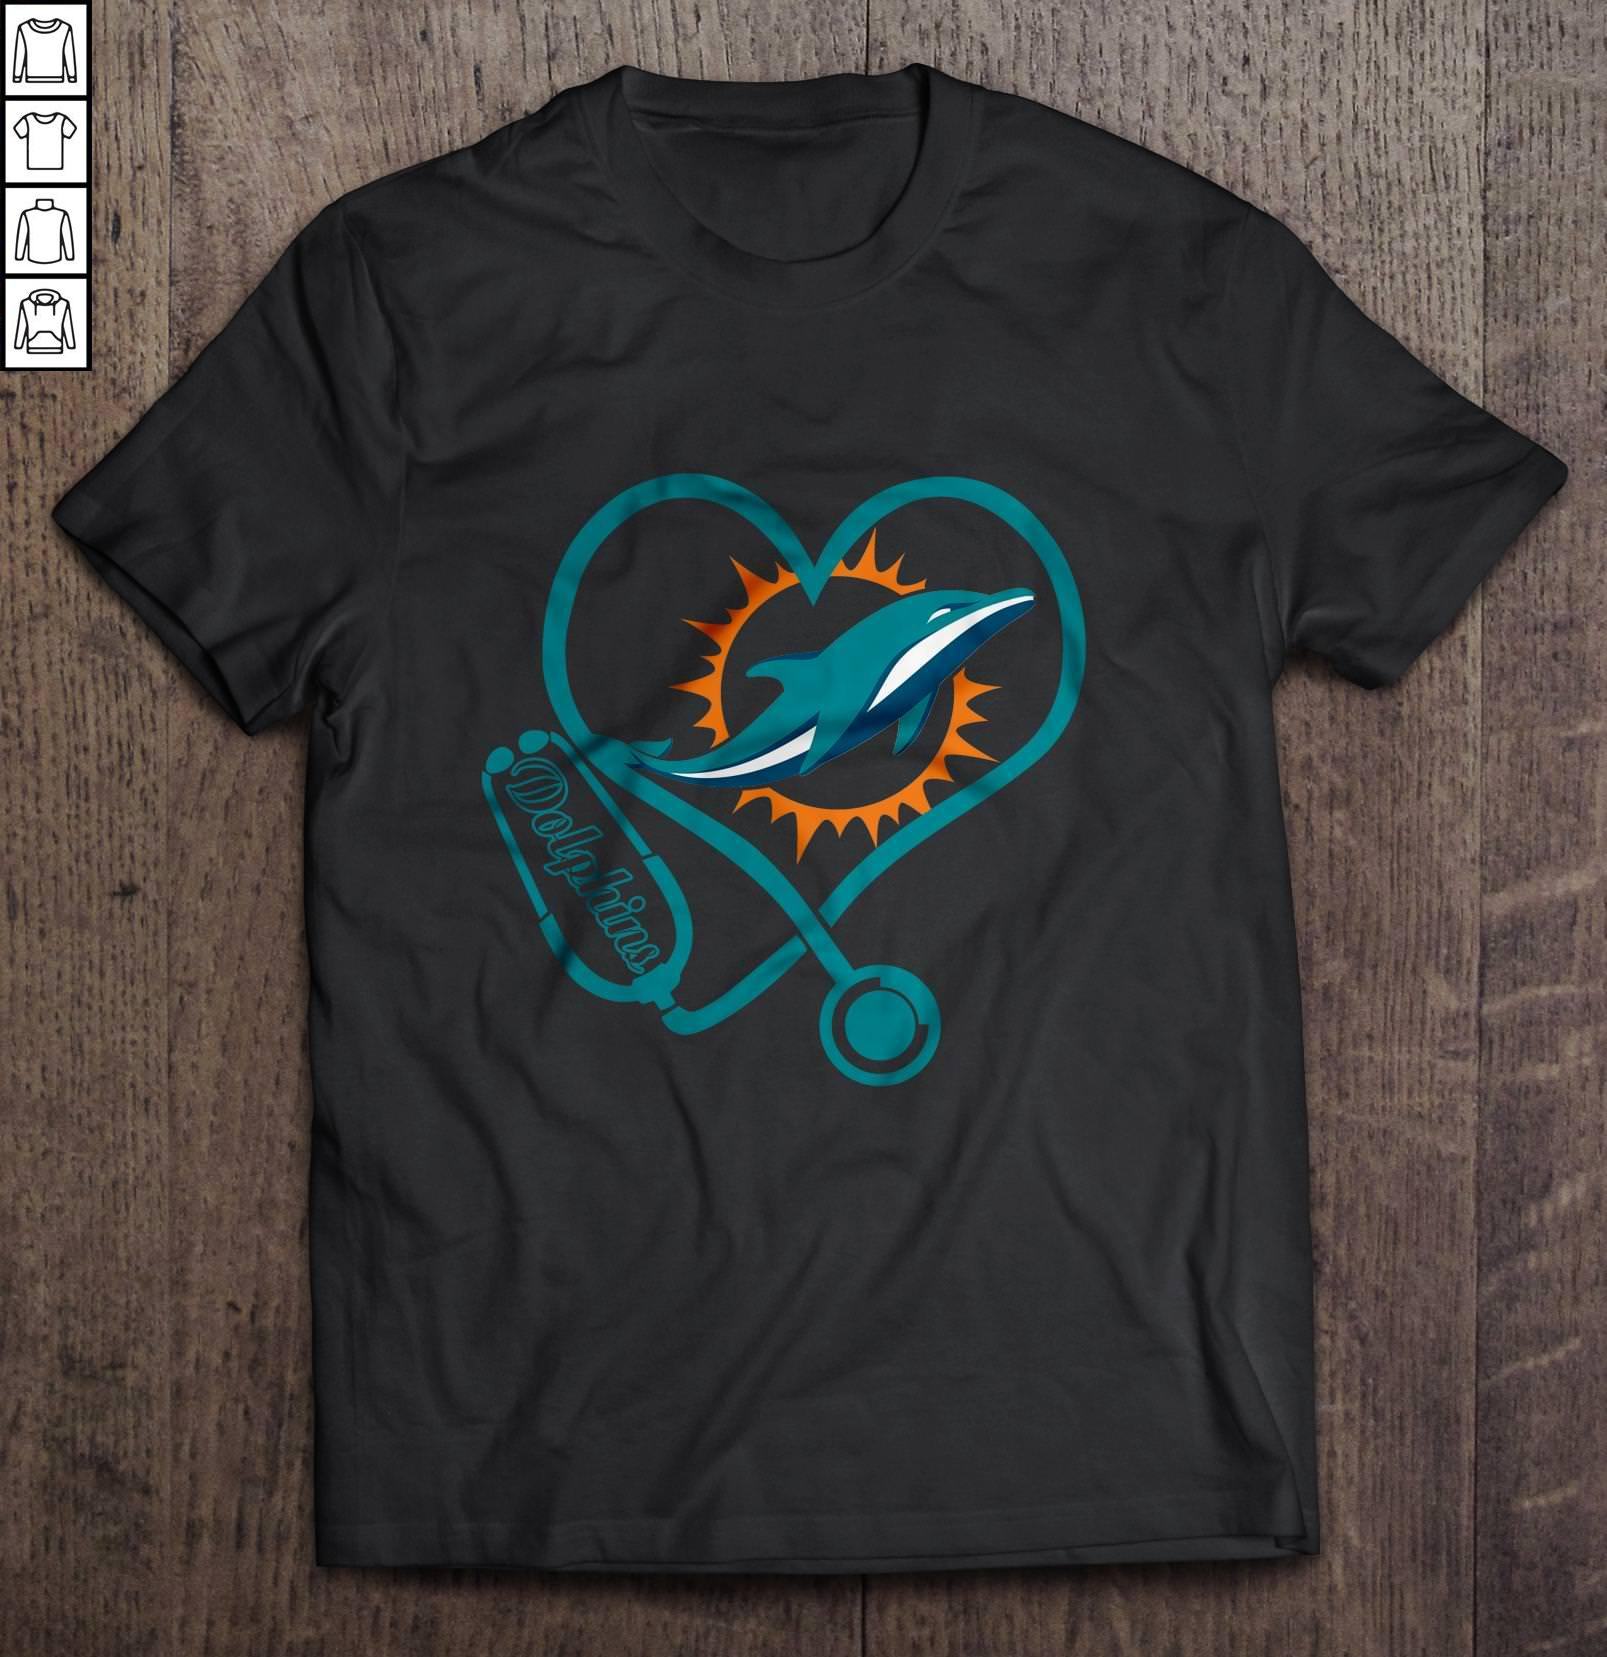 Miami Dolphins Shop - Miami Dolphins Stethoscope NFL Gift Top 1